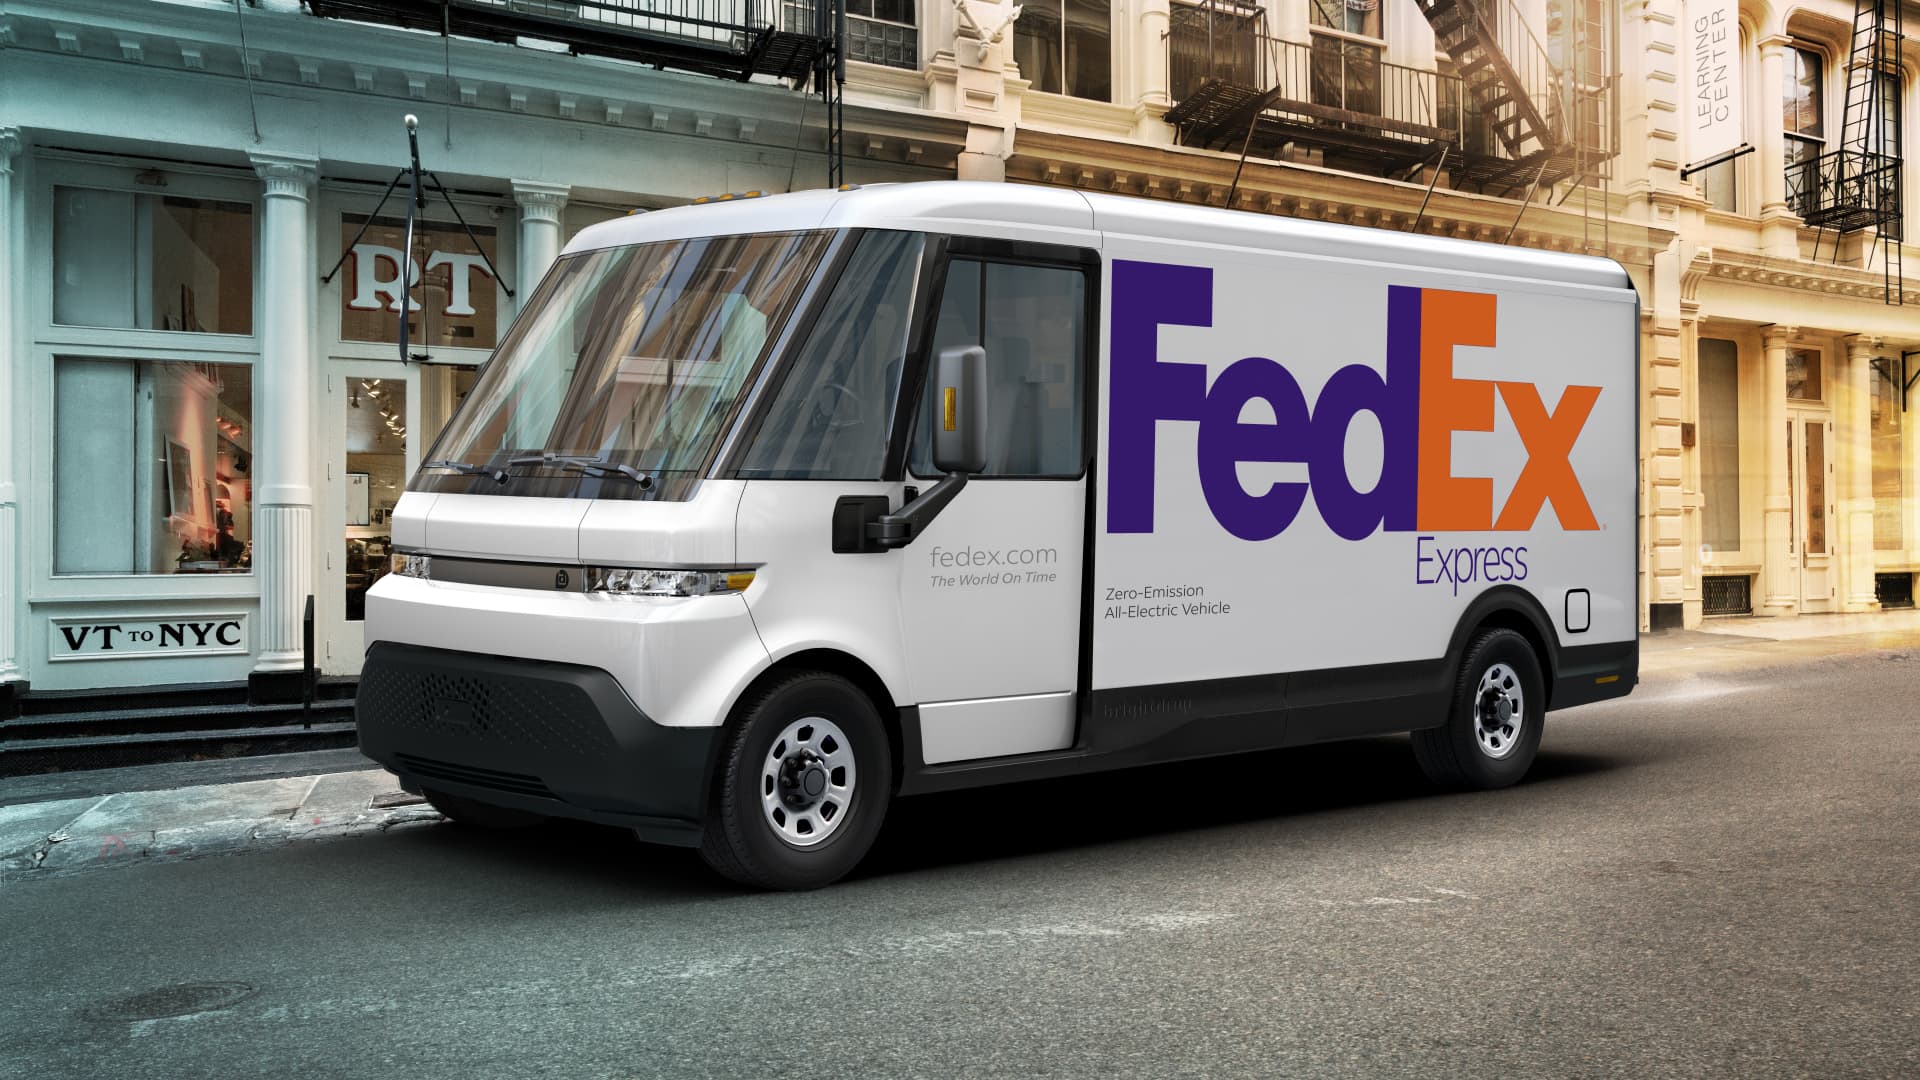 Stocks making the biggest moves midday: FedEx, Continental Resources, Oracle and more